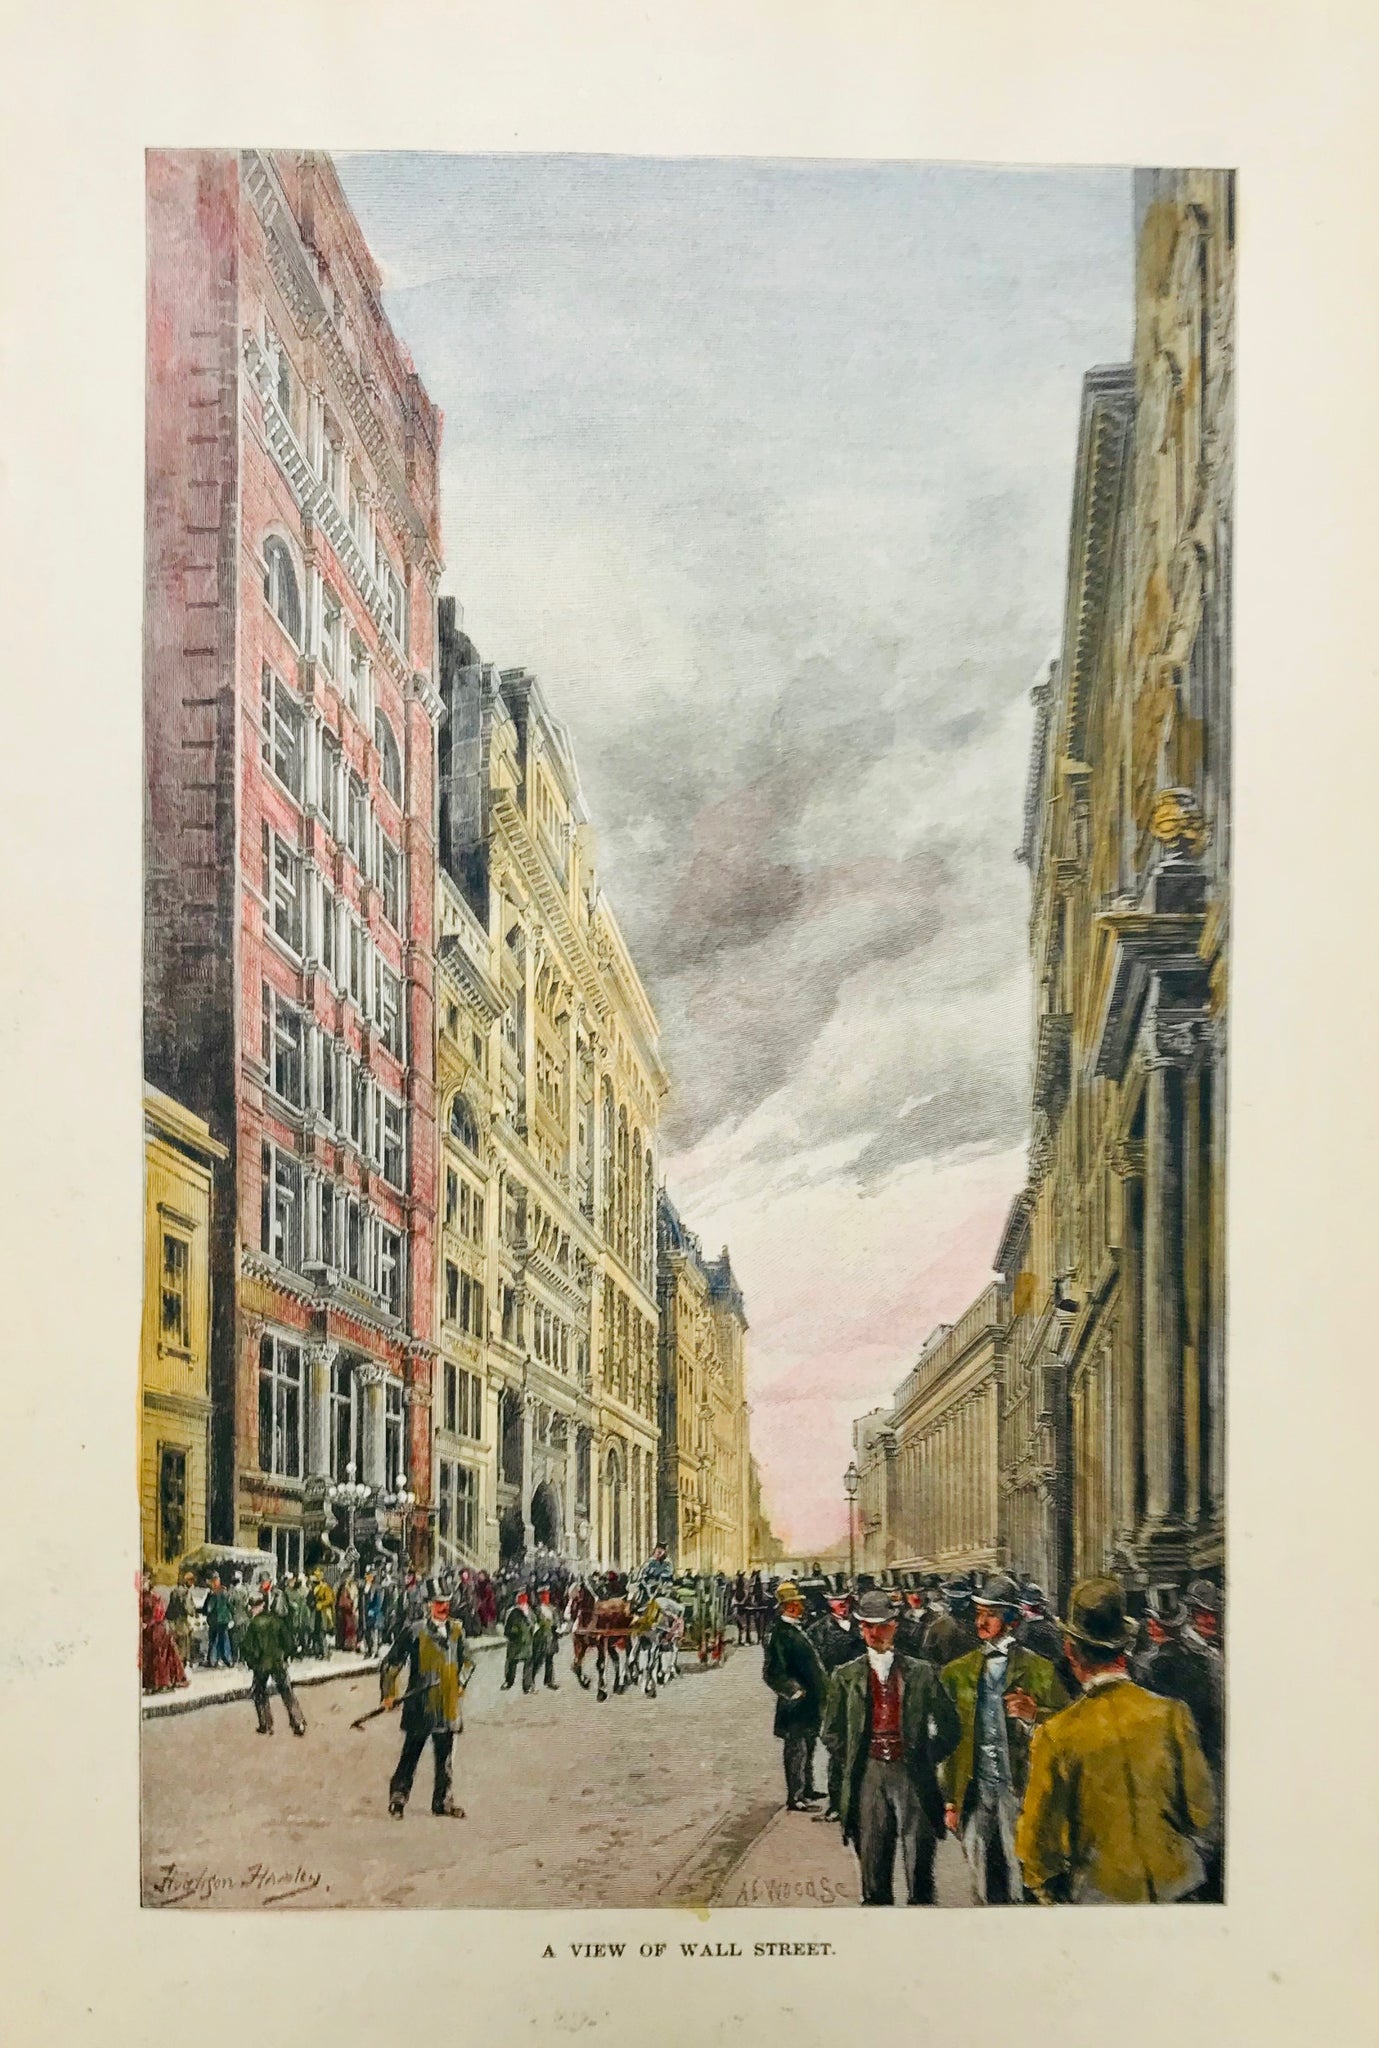 New York City. - "A View of Wall Street"  Lively street scene with lots of bankers.  Hand-colored wood engraving by A. E. Wood after the drawing by Hughson Hawley  Published 1890.